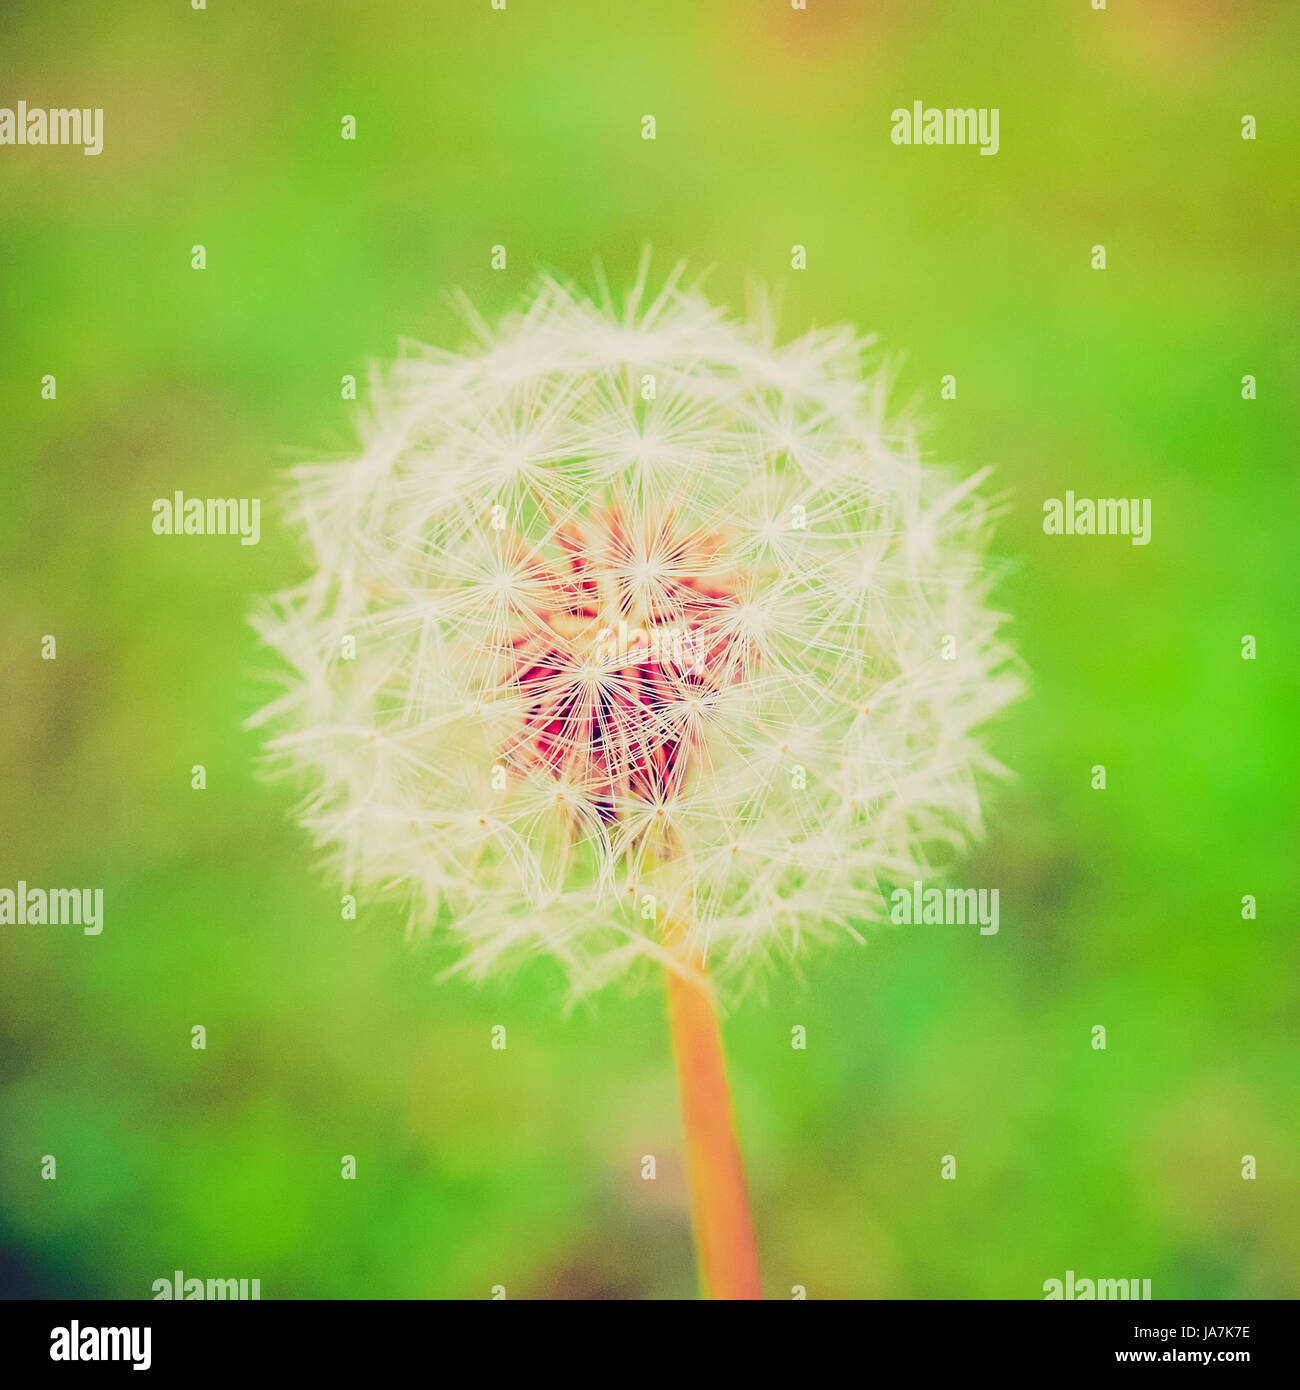 Vintage looking A dandelion flower over blurred green background Stock Photo